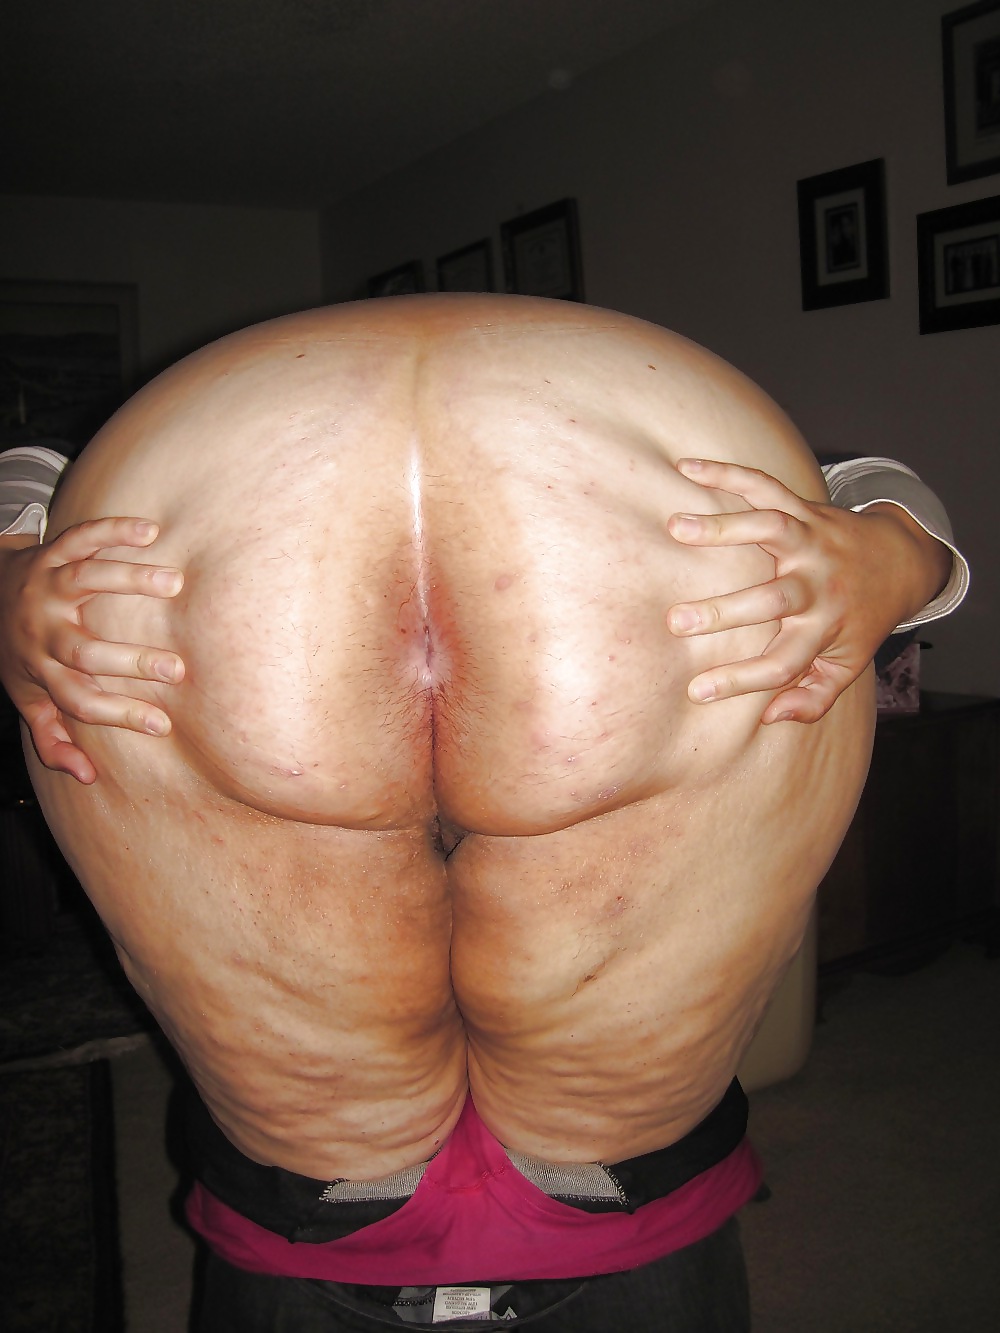 wife ass,fat pussy adult photos